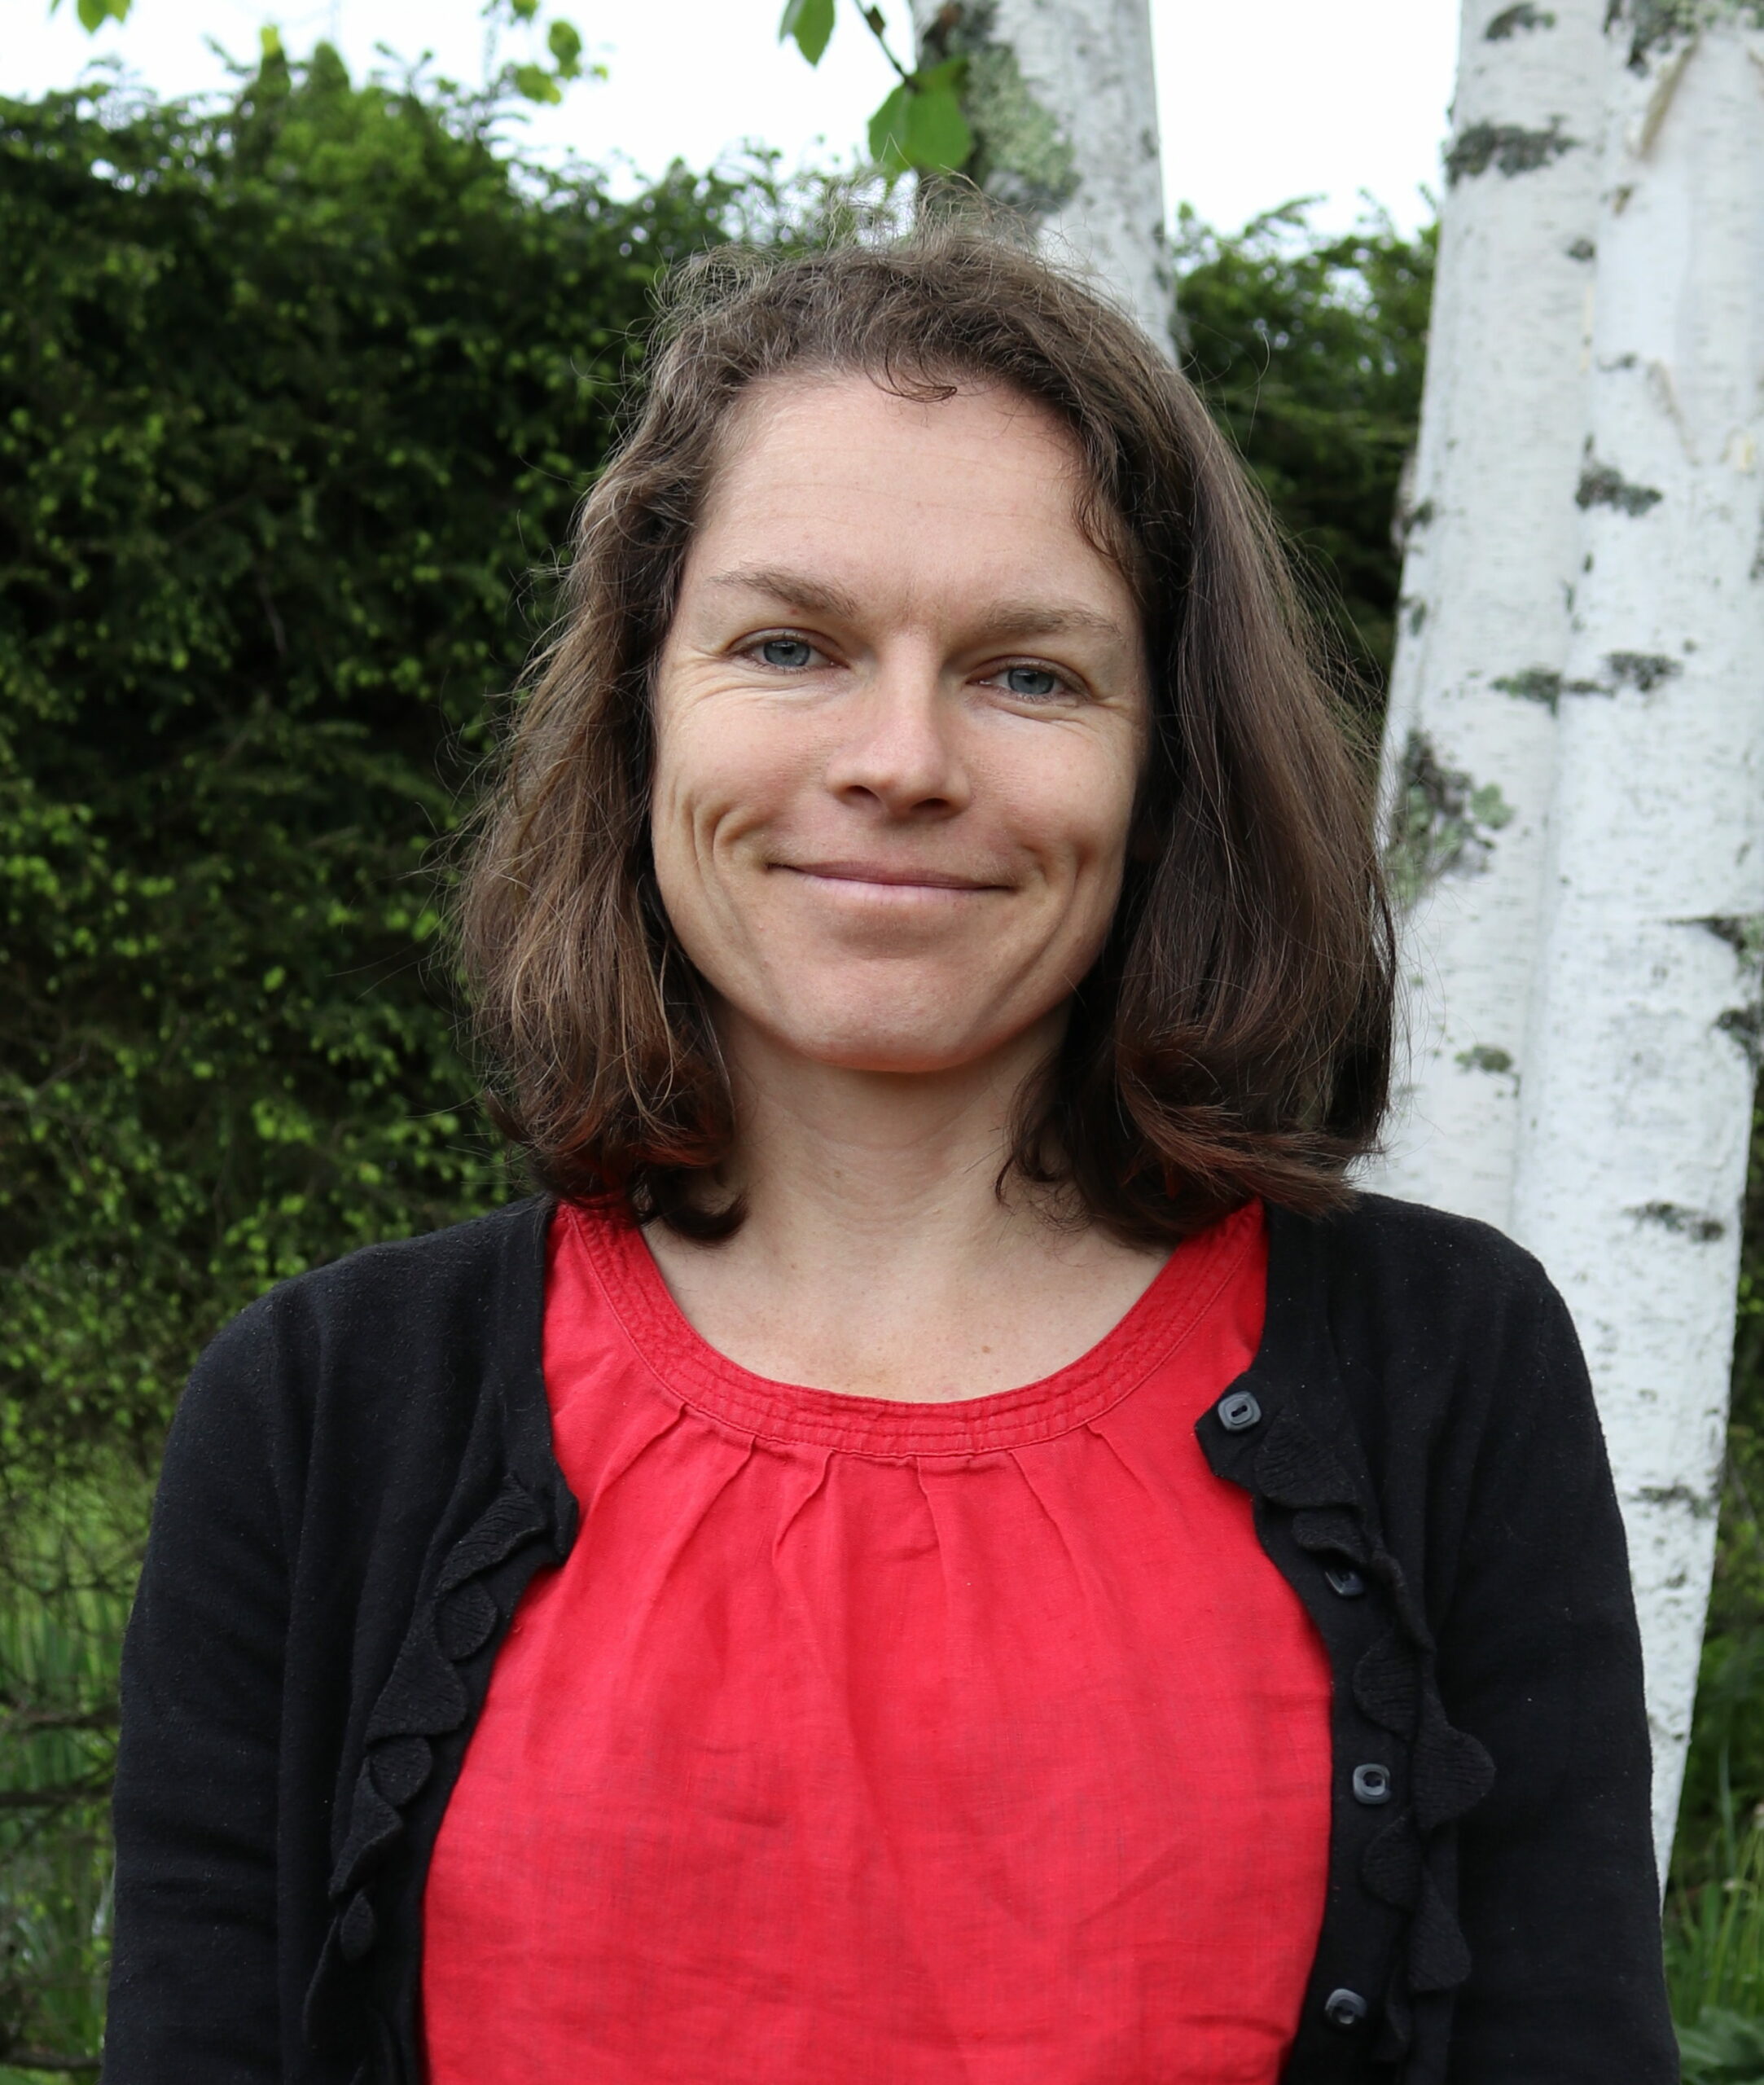 Laura Spence is dean of Academics and a member of the Ecology faculty at Sterling College in Vermont.